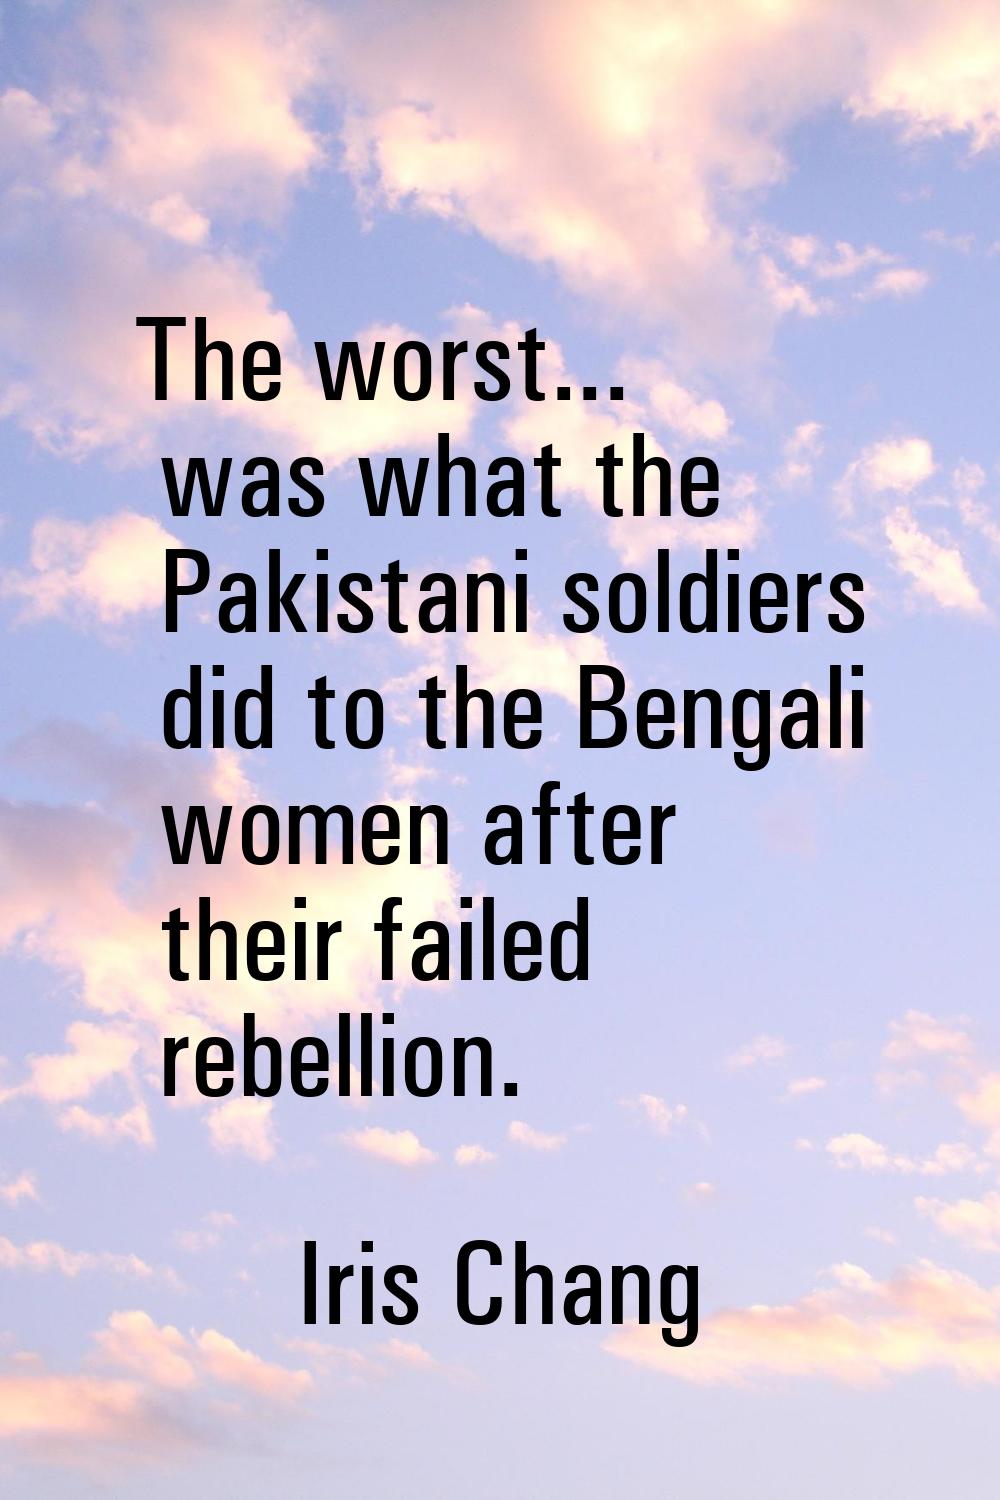 The worst... was what the Pakistani soldiers did to the Bengali women after their failed rebellion.